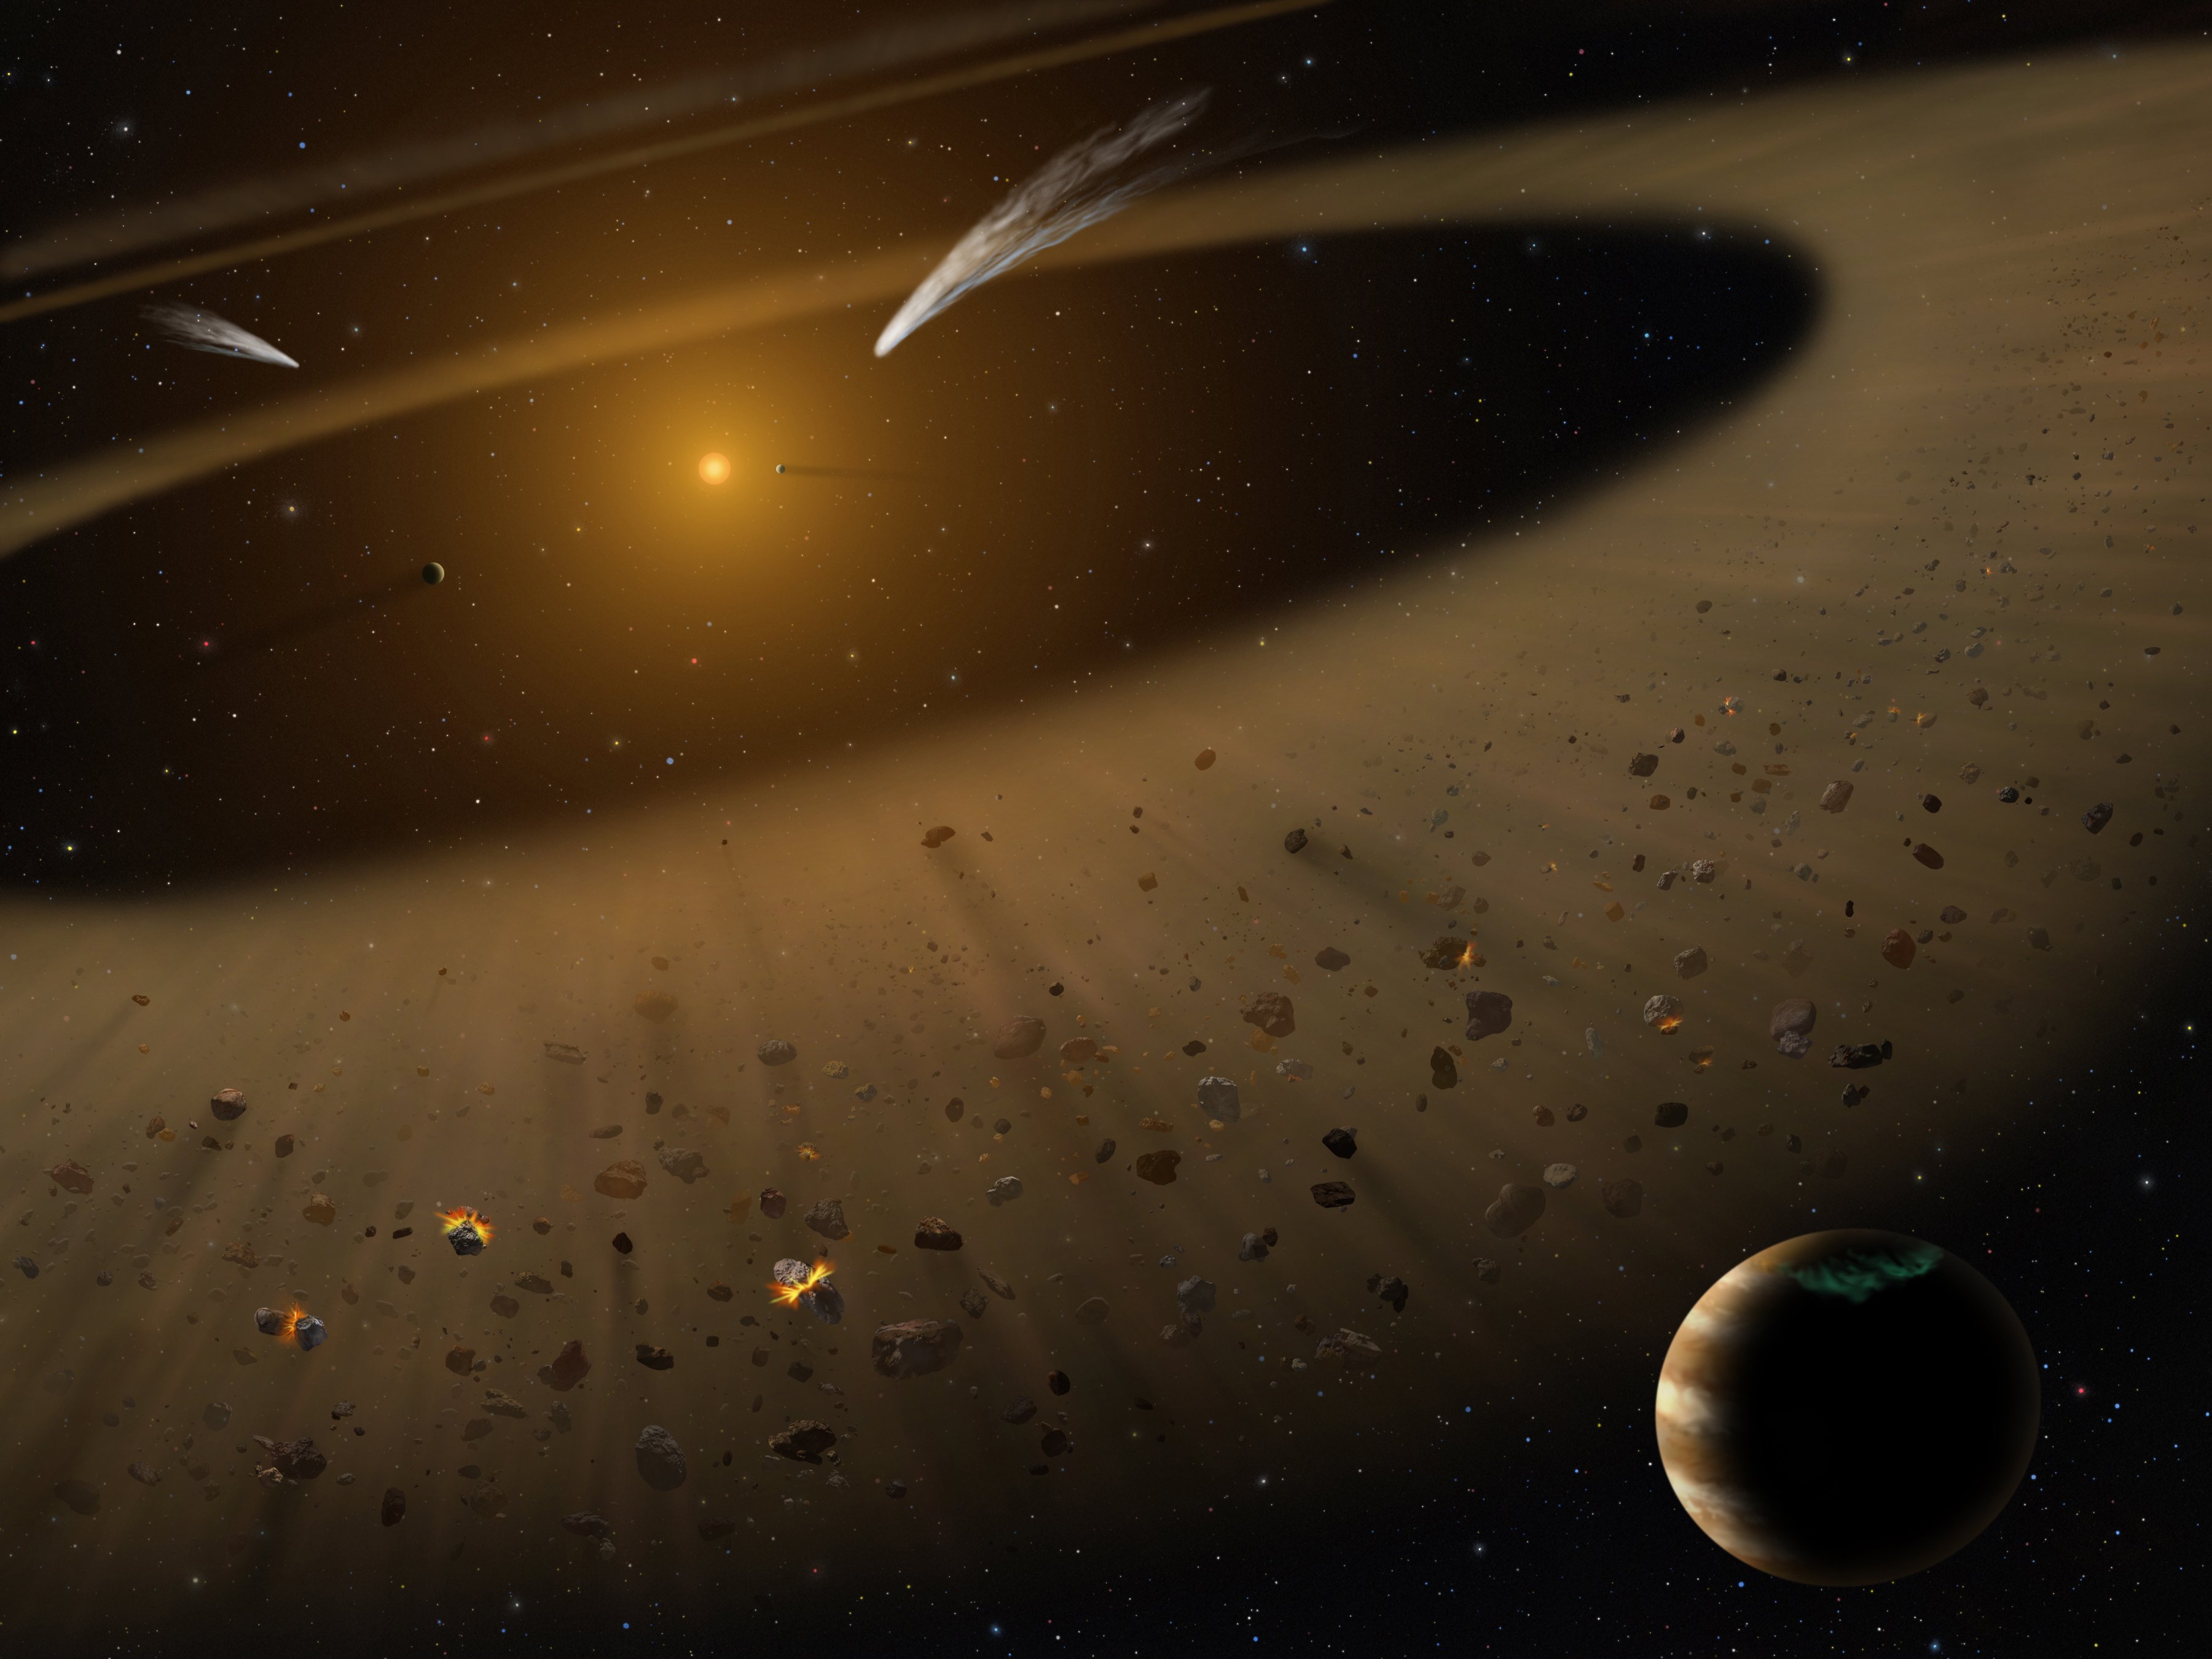 A 3-D rendering of an asteroid belt. A bright object in the background is surrounded by several small rocks. A few rocks have glowing tails behind them, while a larger planet sits in the foreground.